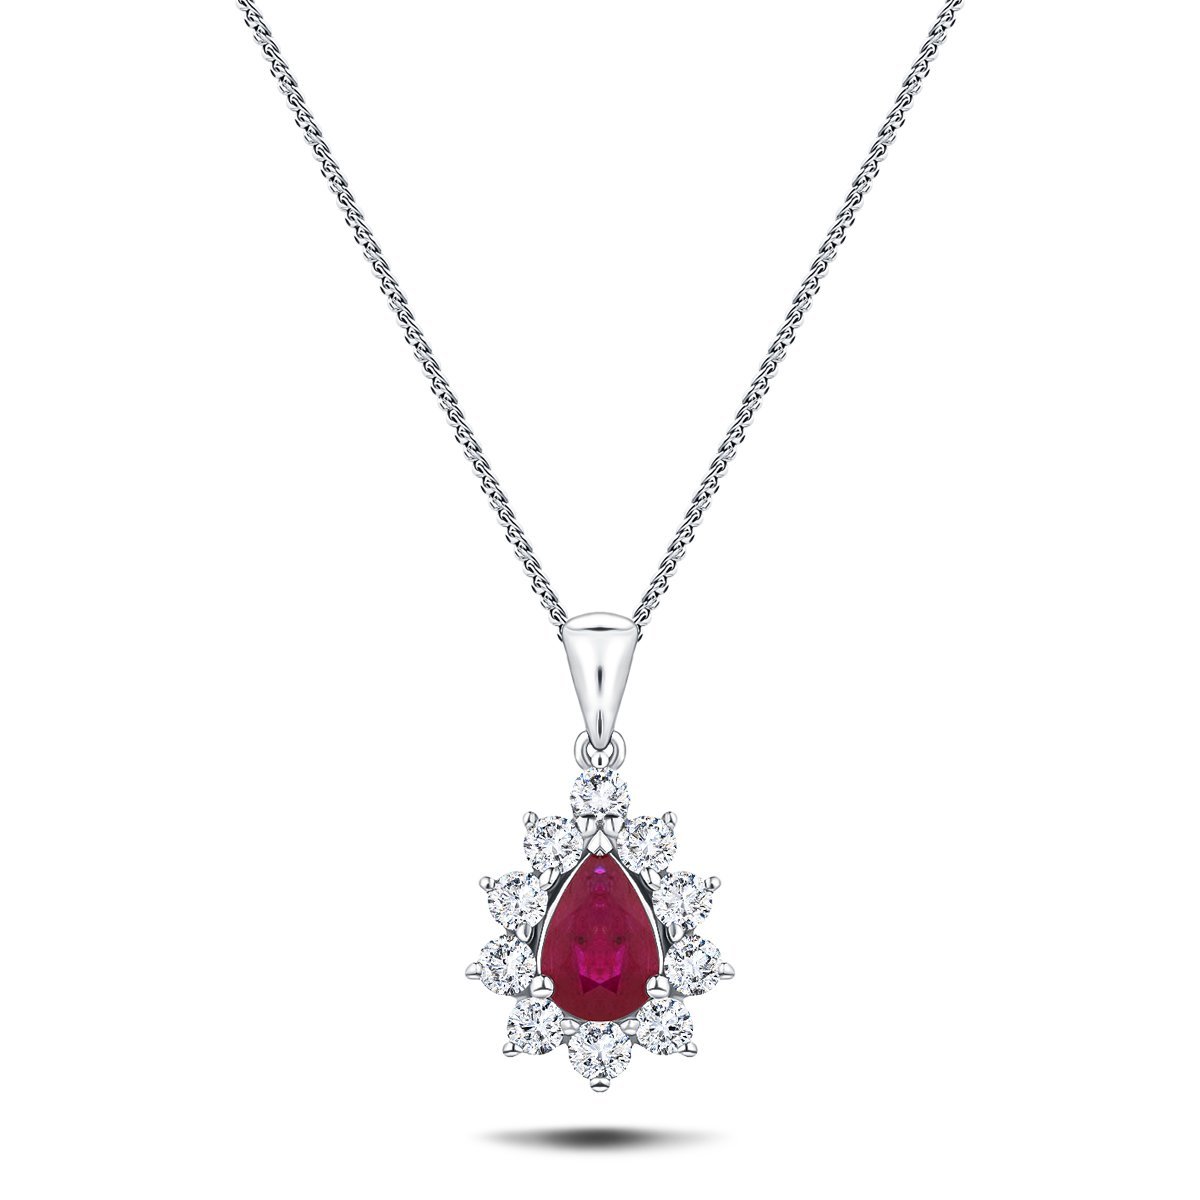 Ruby 0.45ct & 0.20ct G/SI Diamond Necklace in 18k White Gold - All Diamond